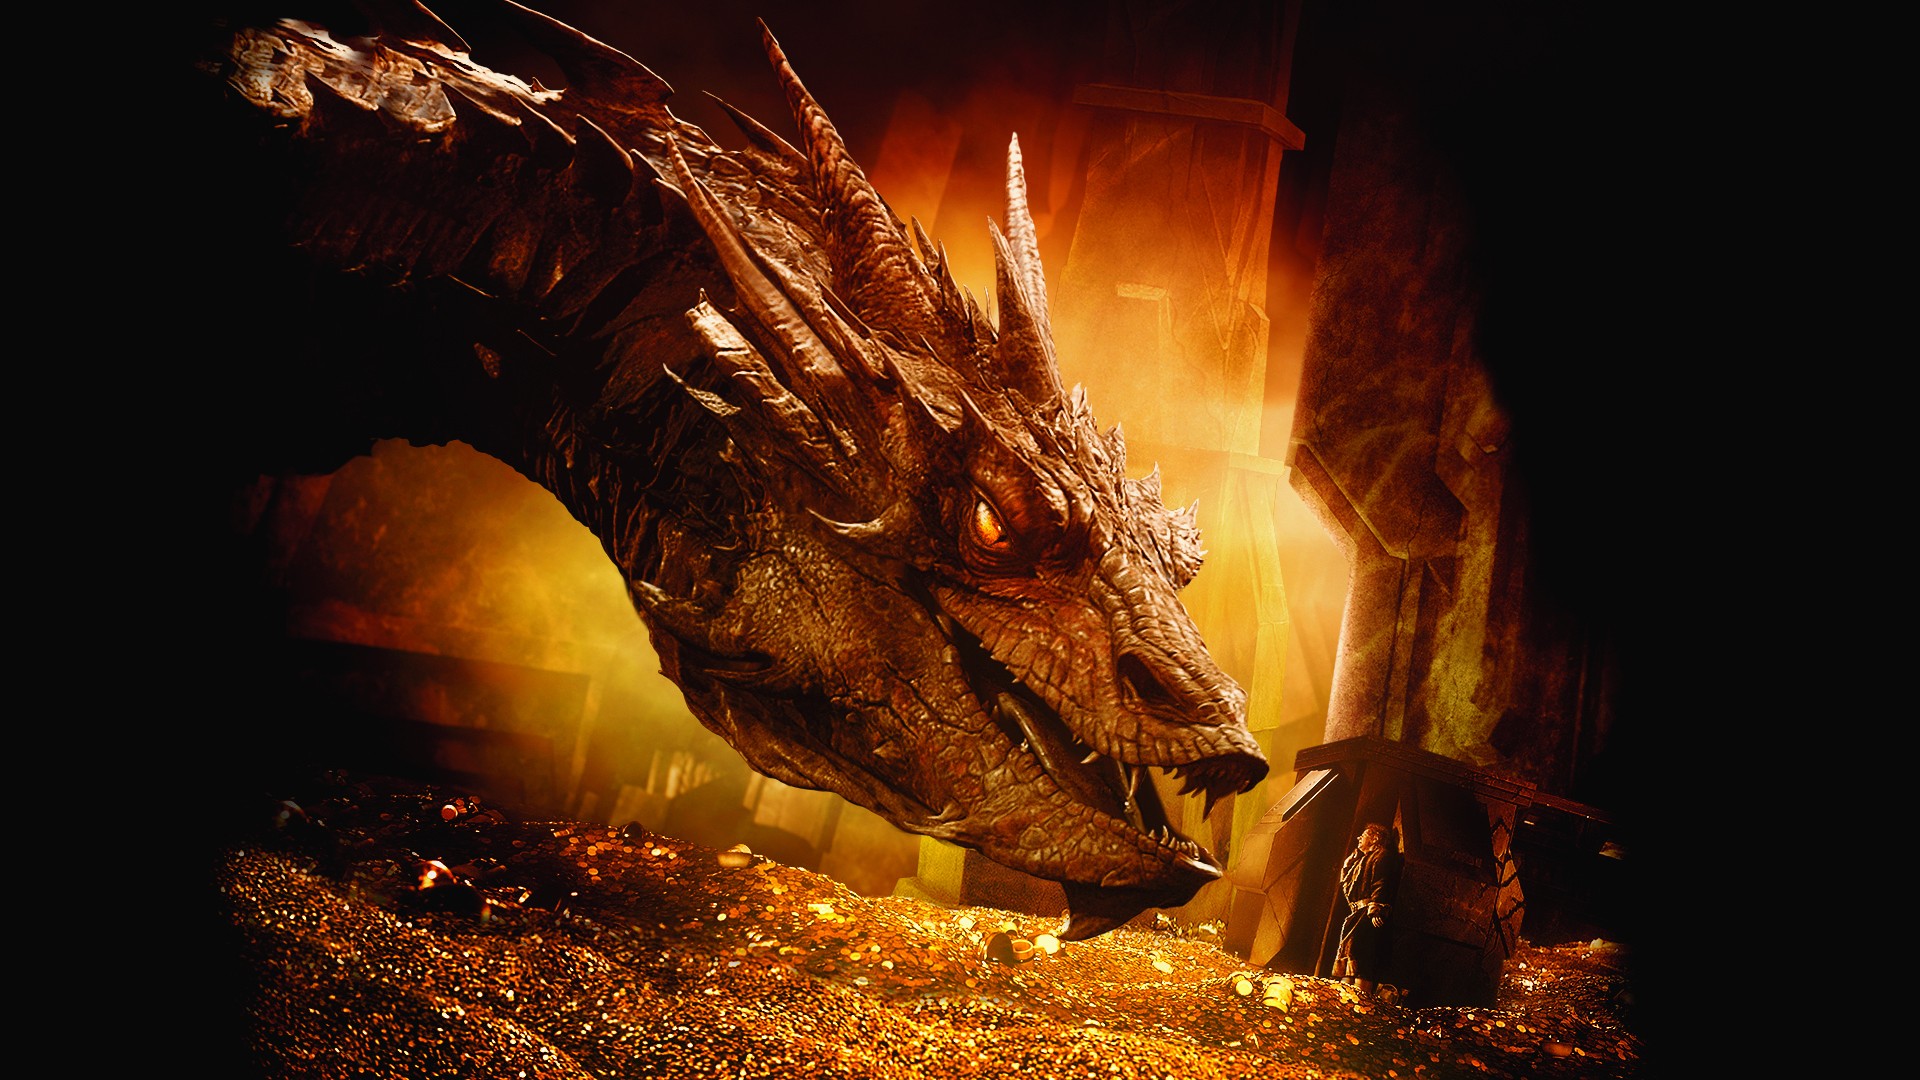 The Hobbit The Desolation of Smaug Wallpapers 1 2 1920x1080